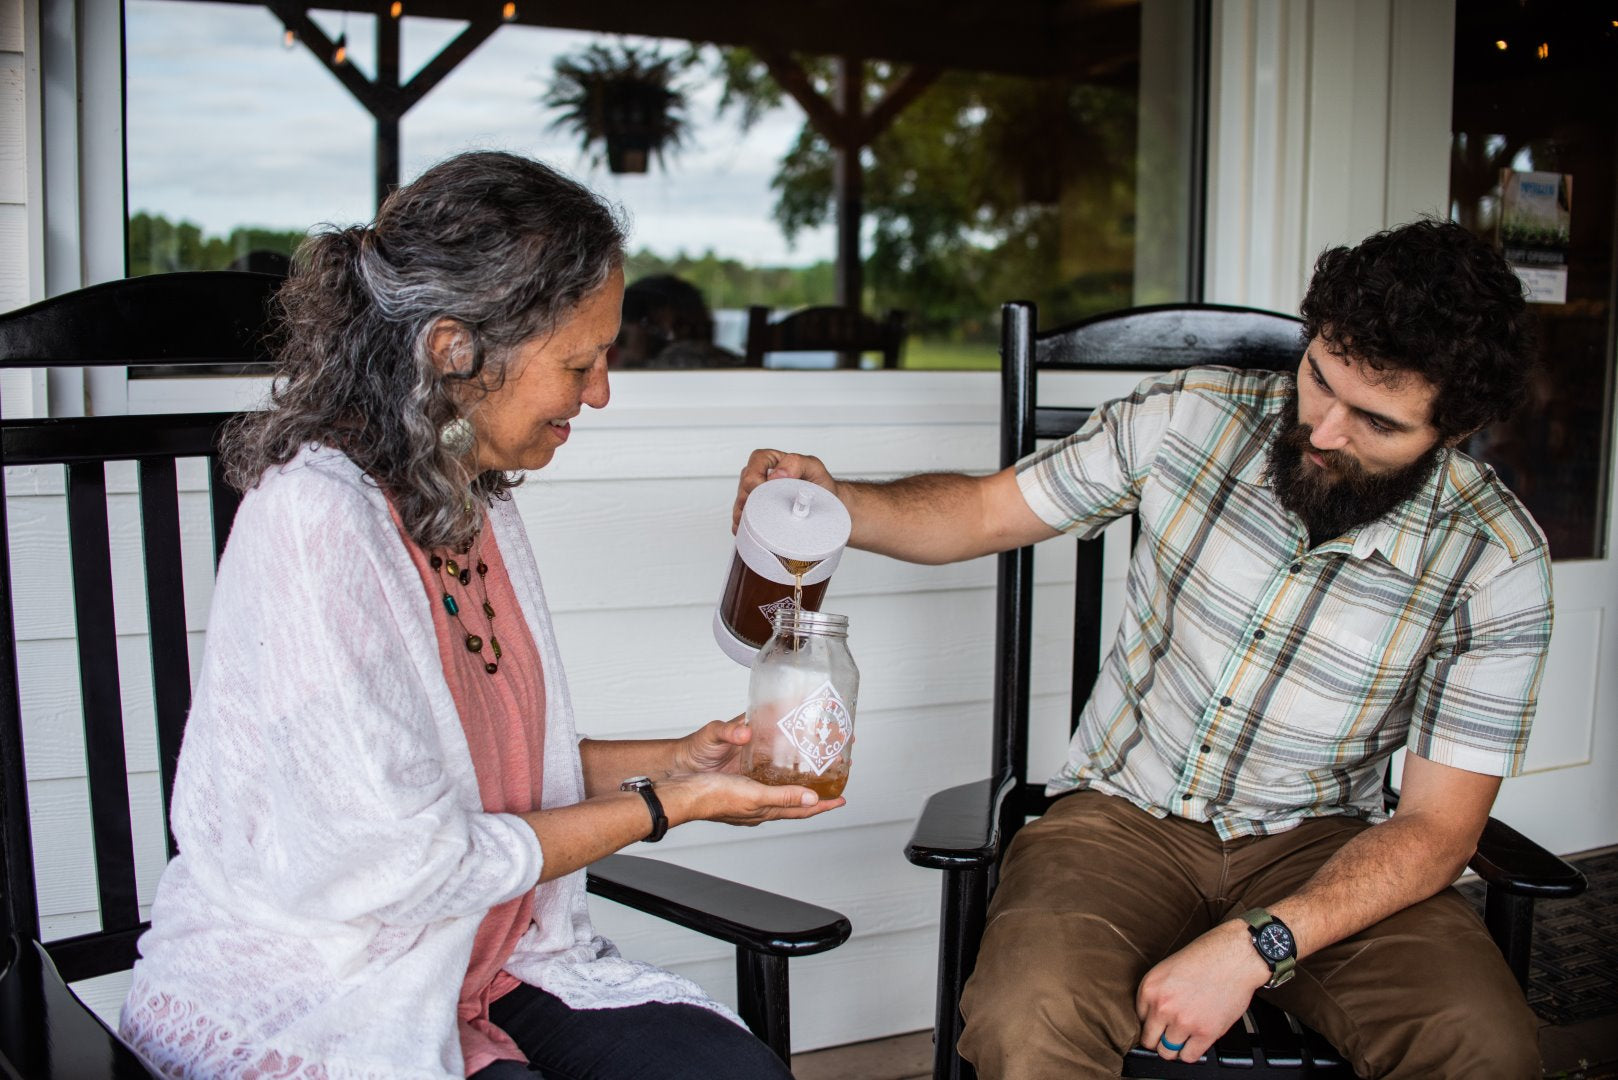 A son pouring his mom a jar of freshly brewed Piper and Leaf tea into a empty Piper and Leaf quart jar.